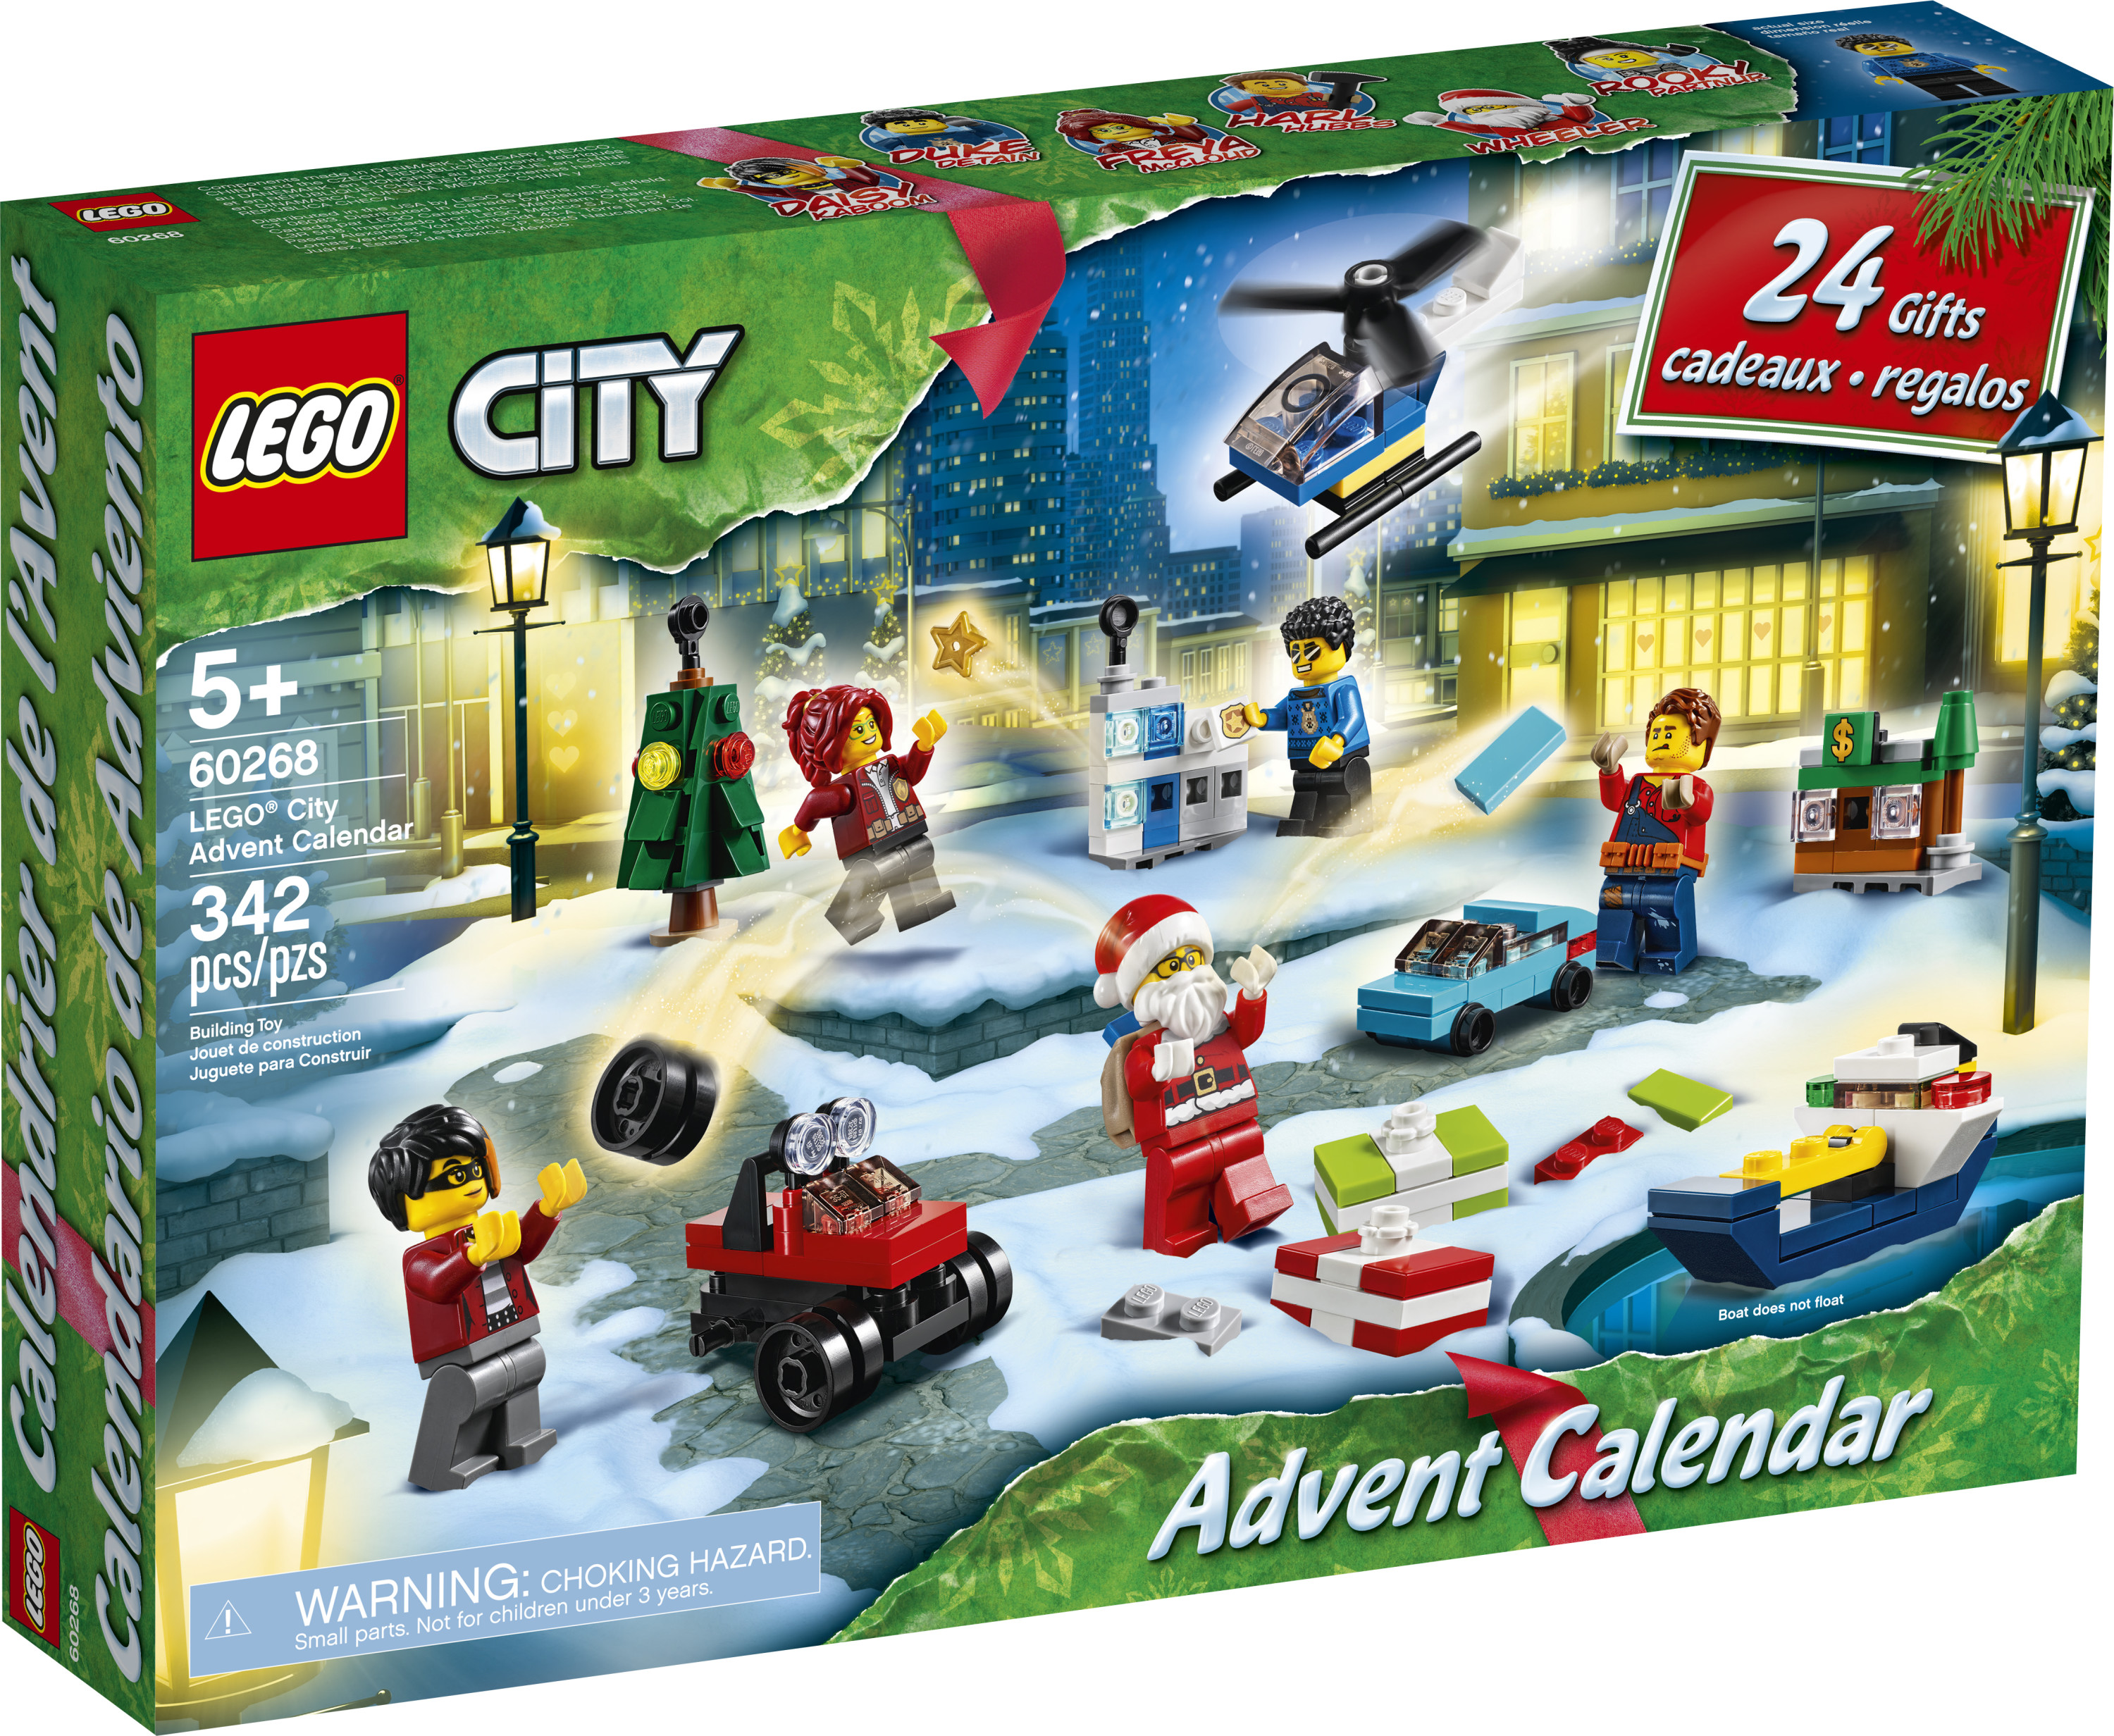 LEGO City Advent Calendar 60268, With City Play Mat, Best Festive Toys for Kids (342 Pieces) - image 4 of 7